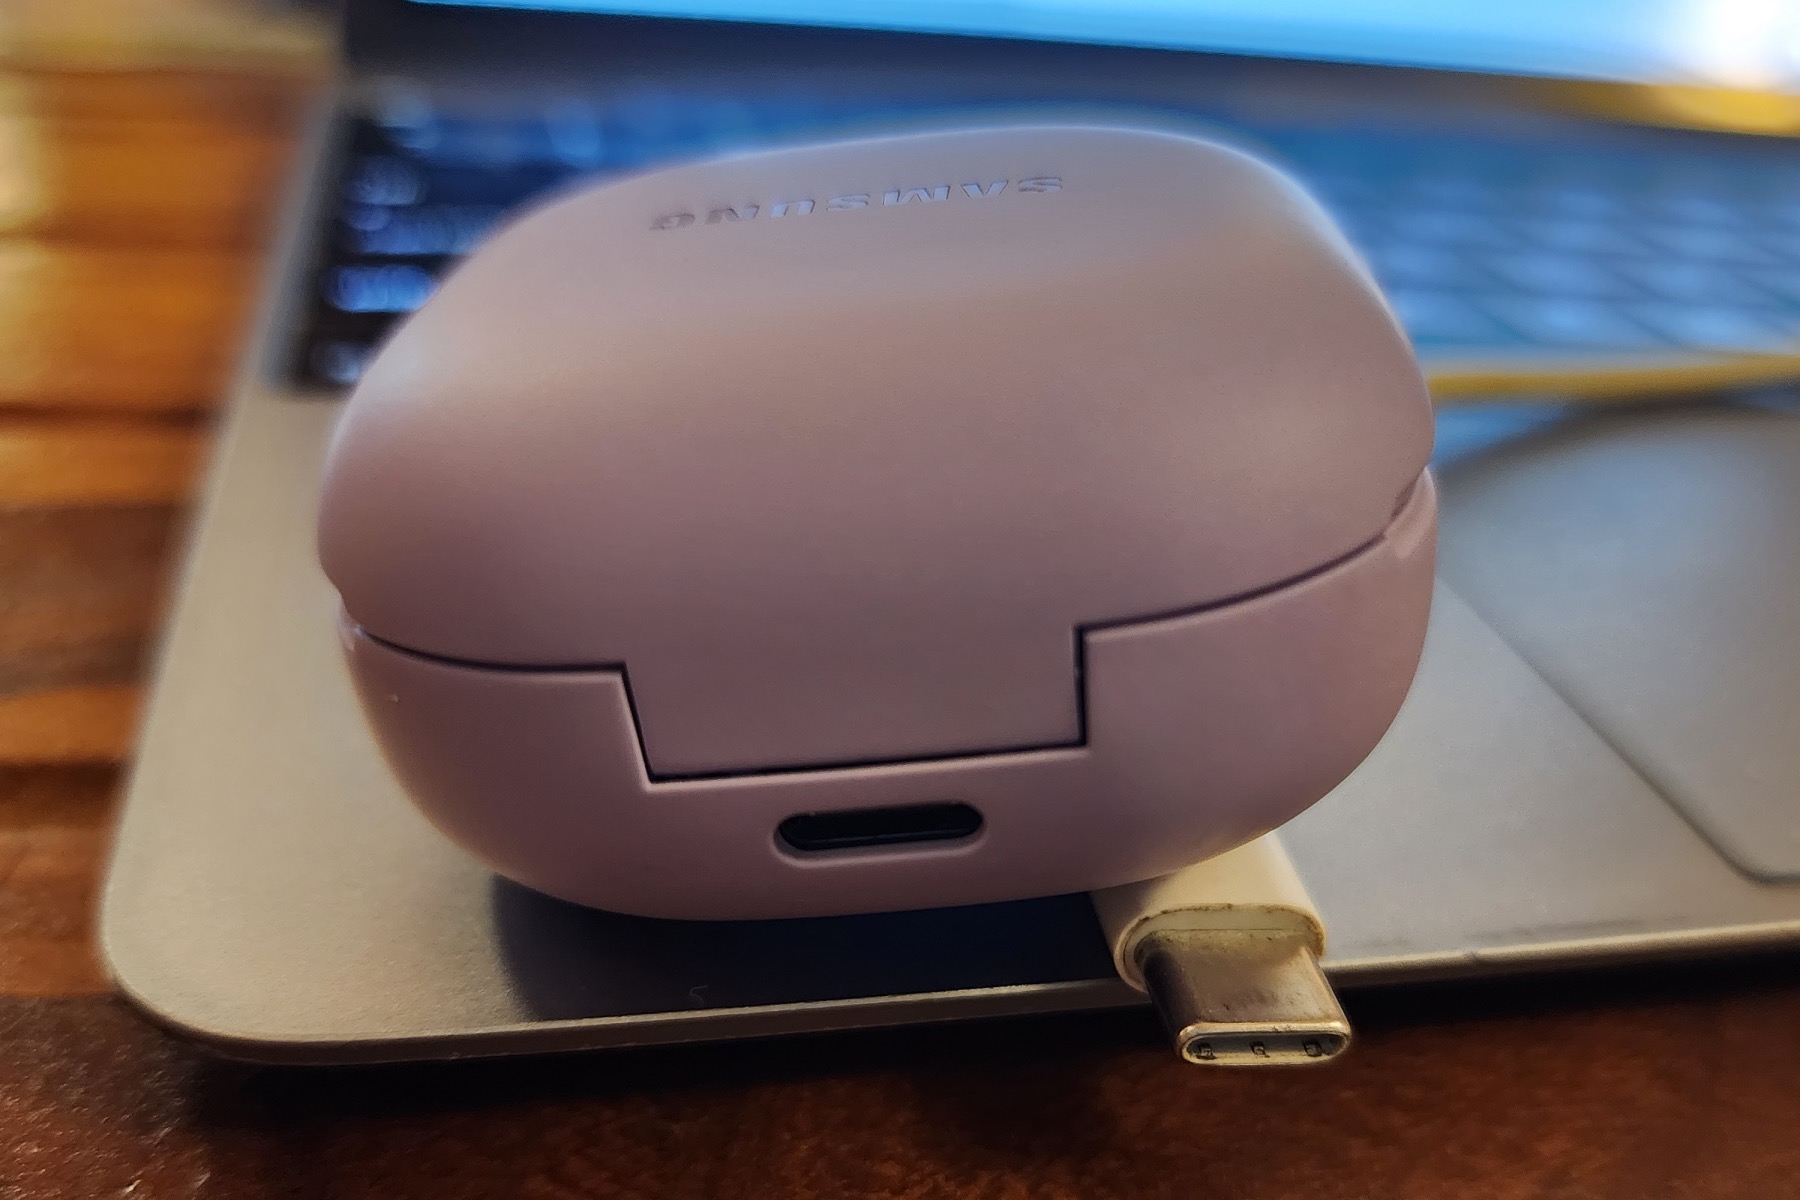 Samsung Galaxy Buds 2 Pro with a USB-C cable